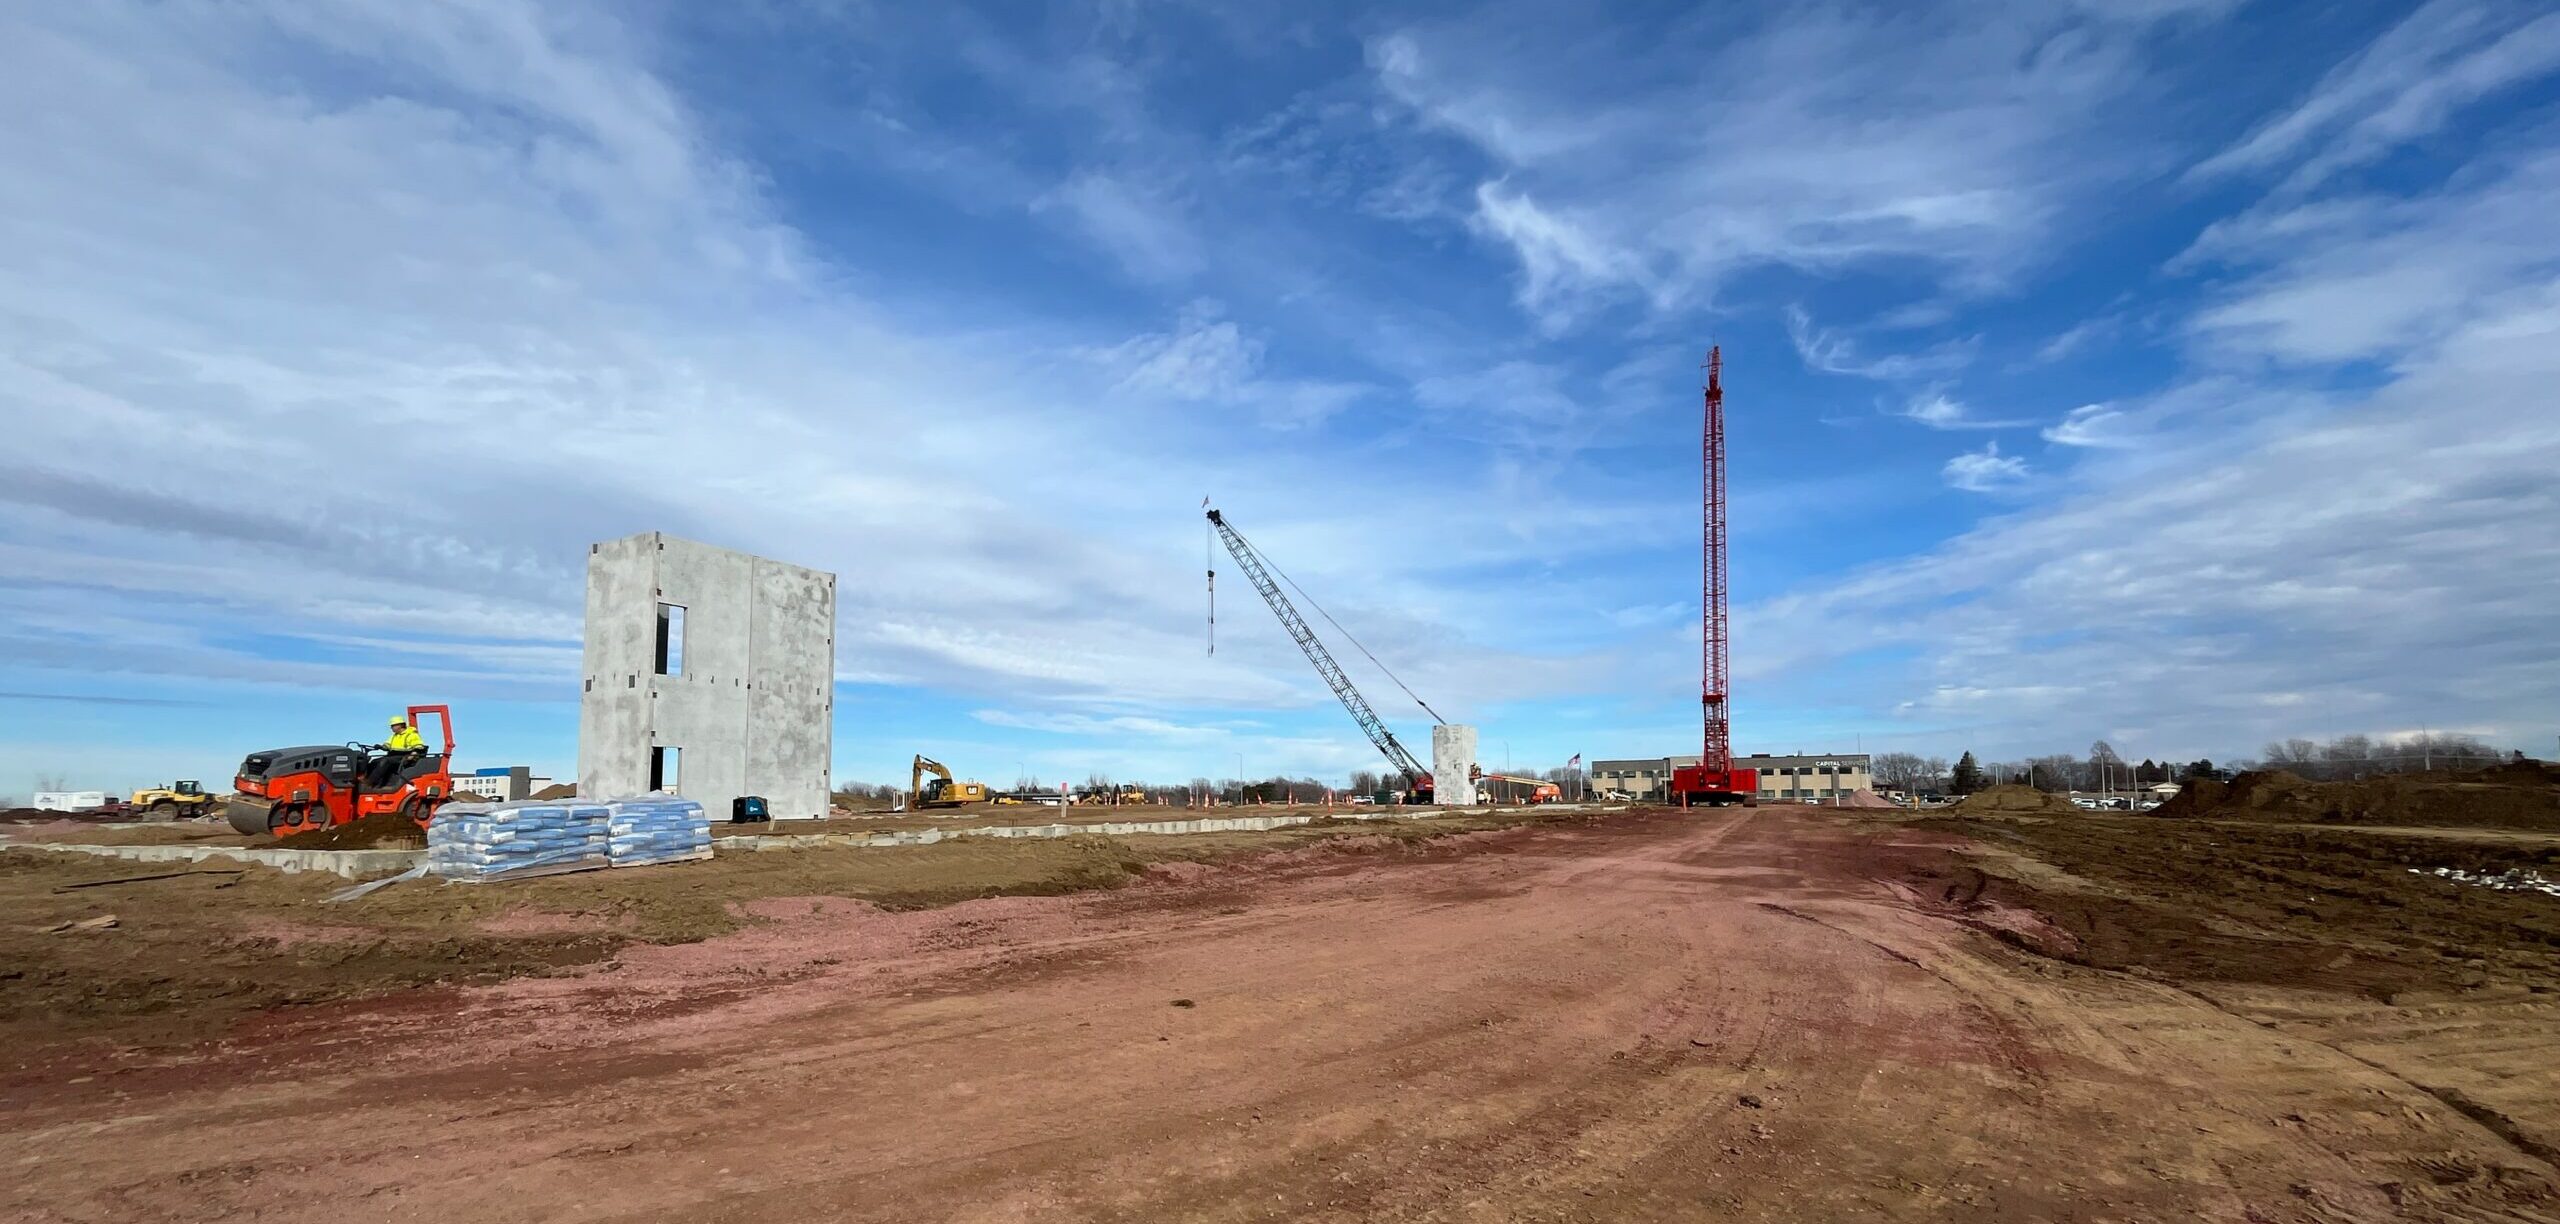 cranes and precast concrete at a construction site in Sioux Falls